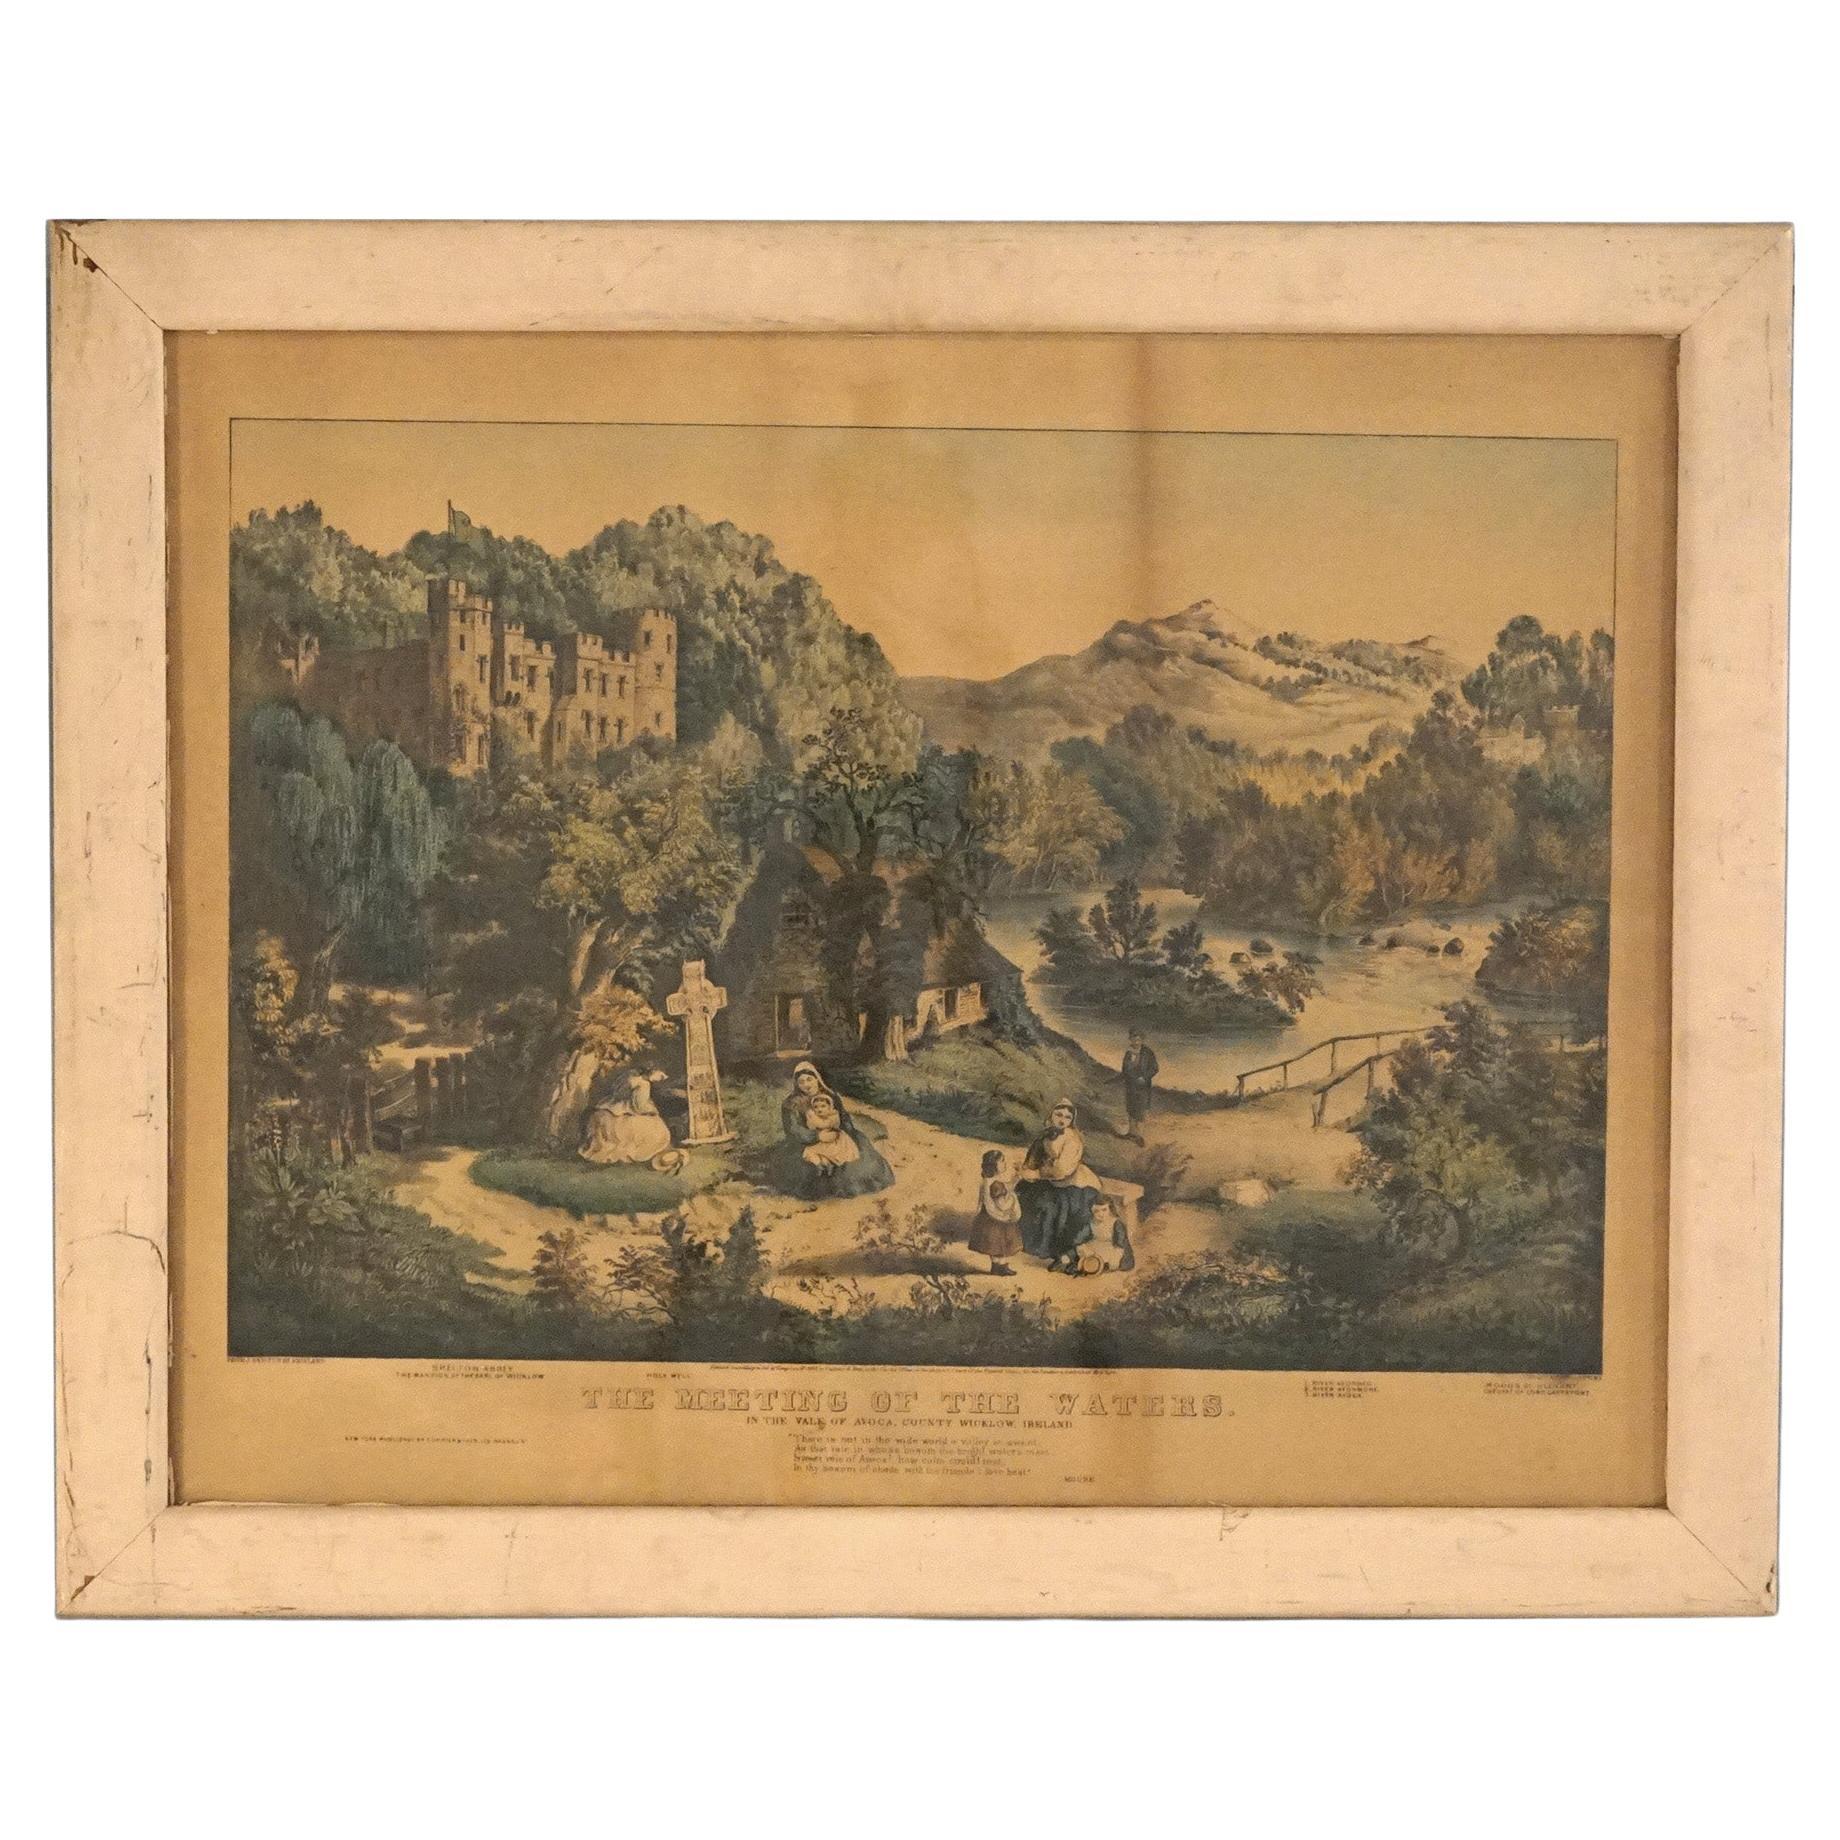 Antique Currier & Ives Print - The Meeting Of The Waters 19th C